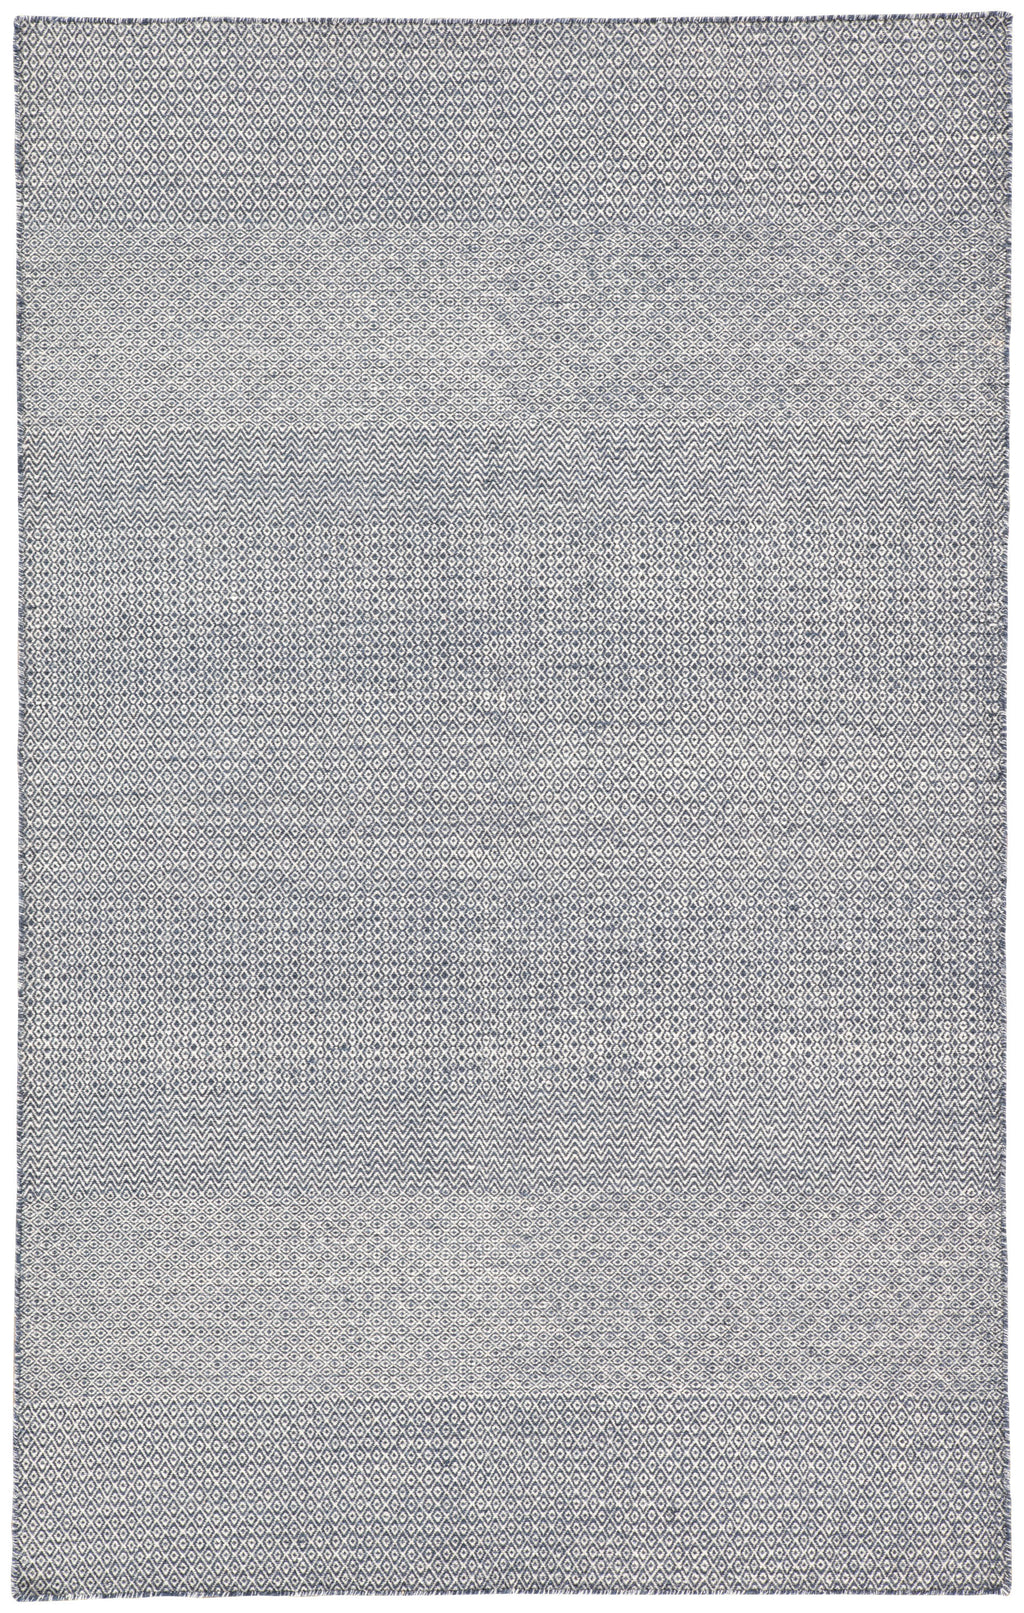 glace geometric rug in blueberry light gray design by jaipur 1